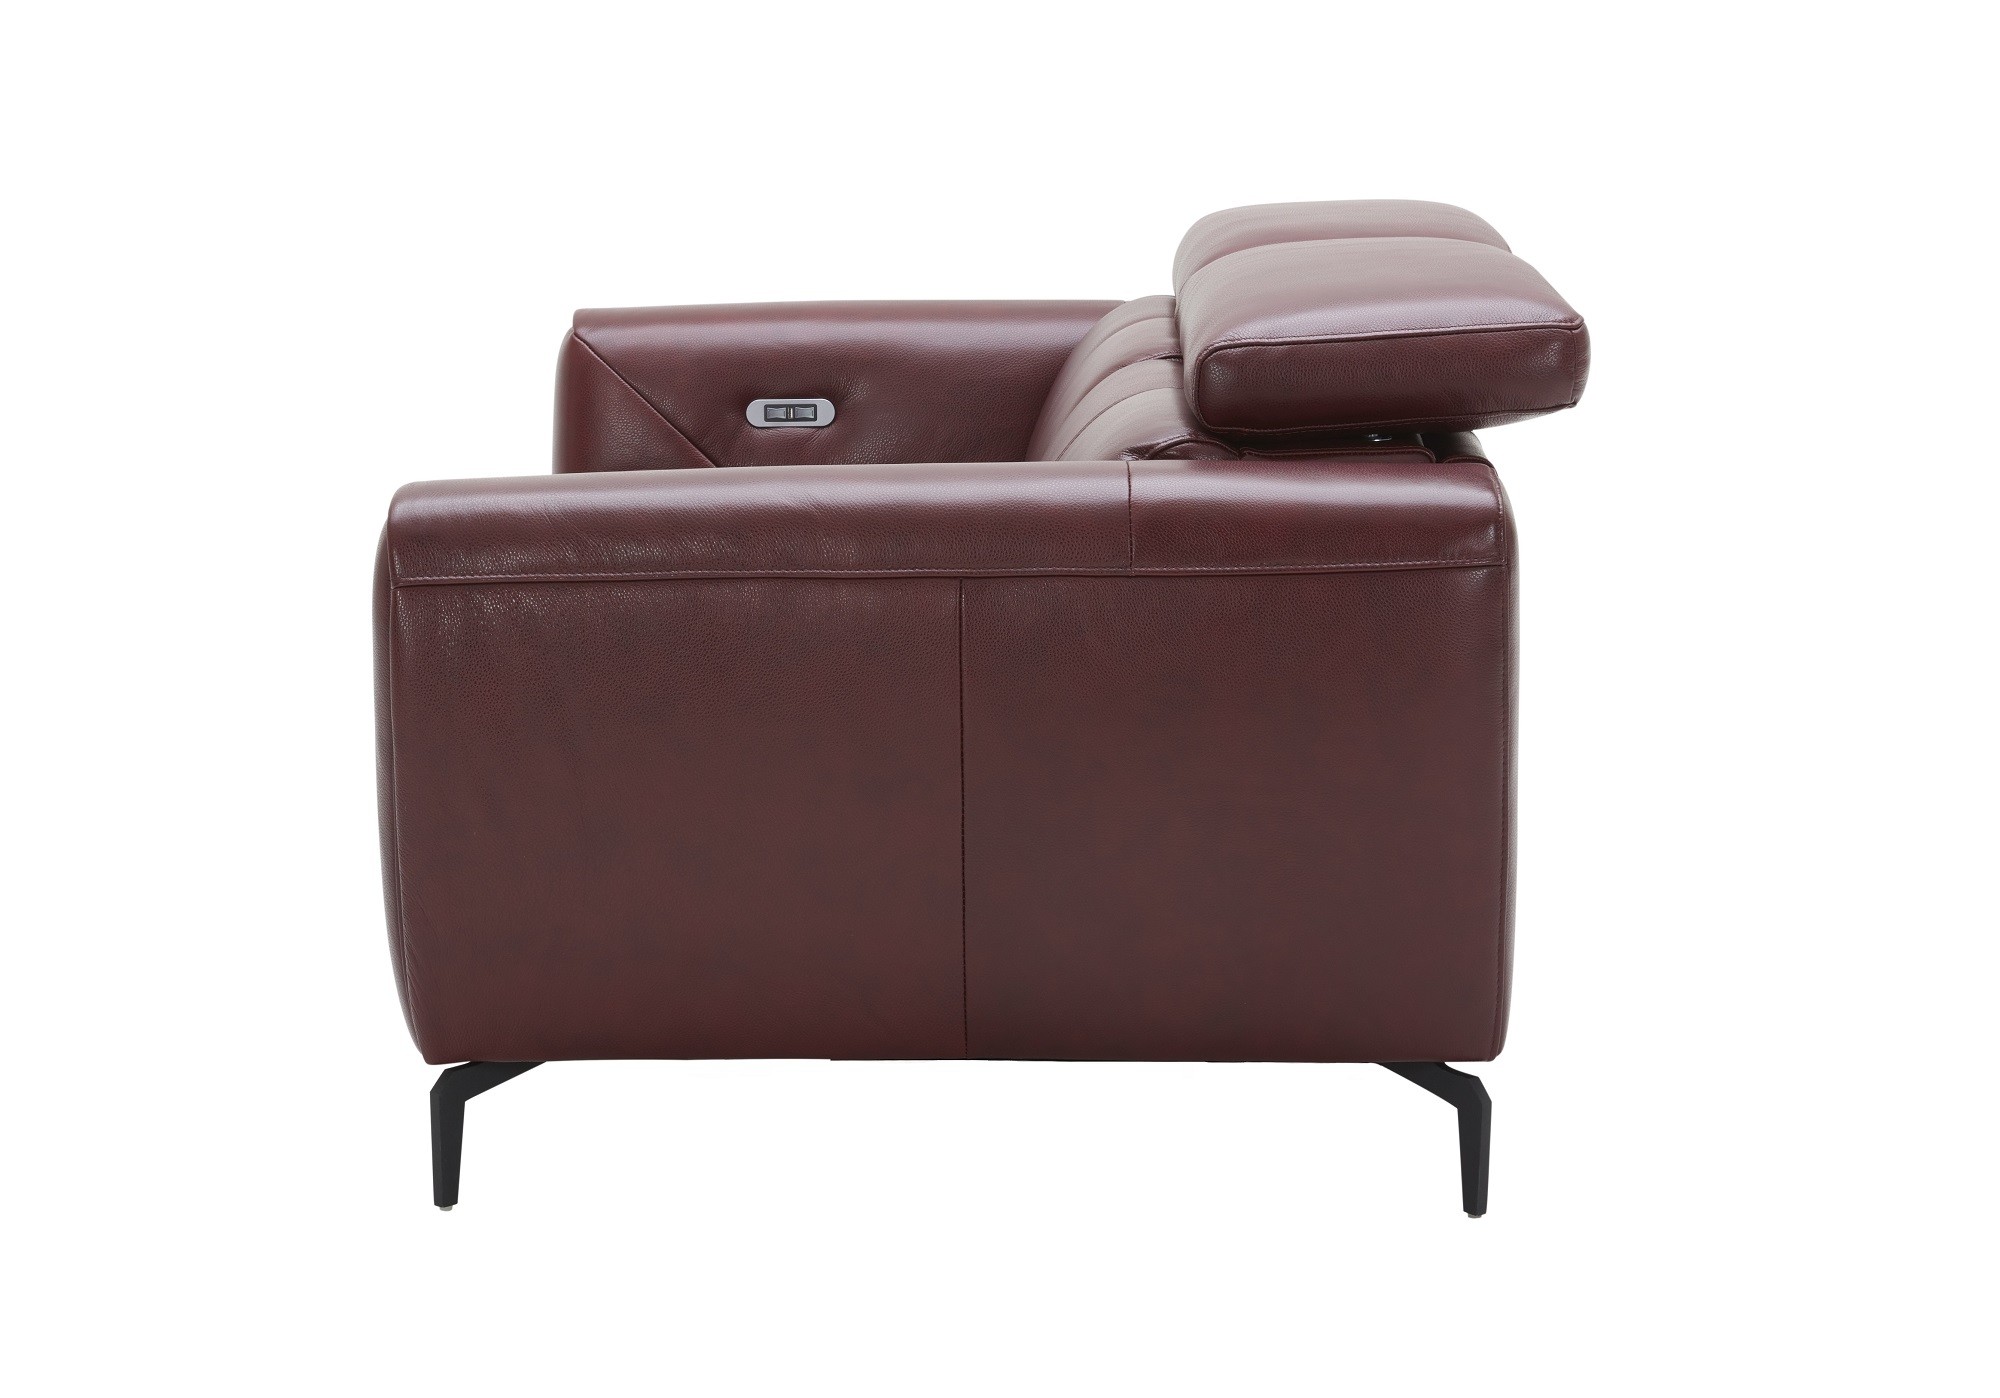 Top-Grain Leather Living Room Sofas - Click Image to Close